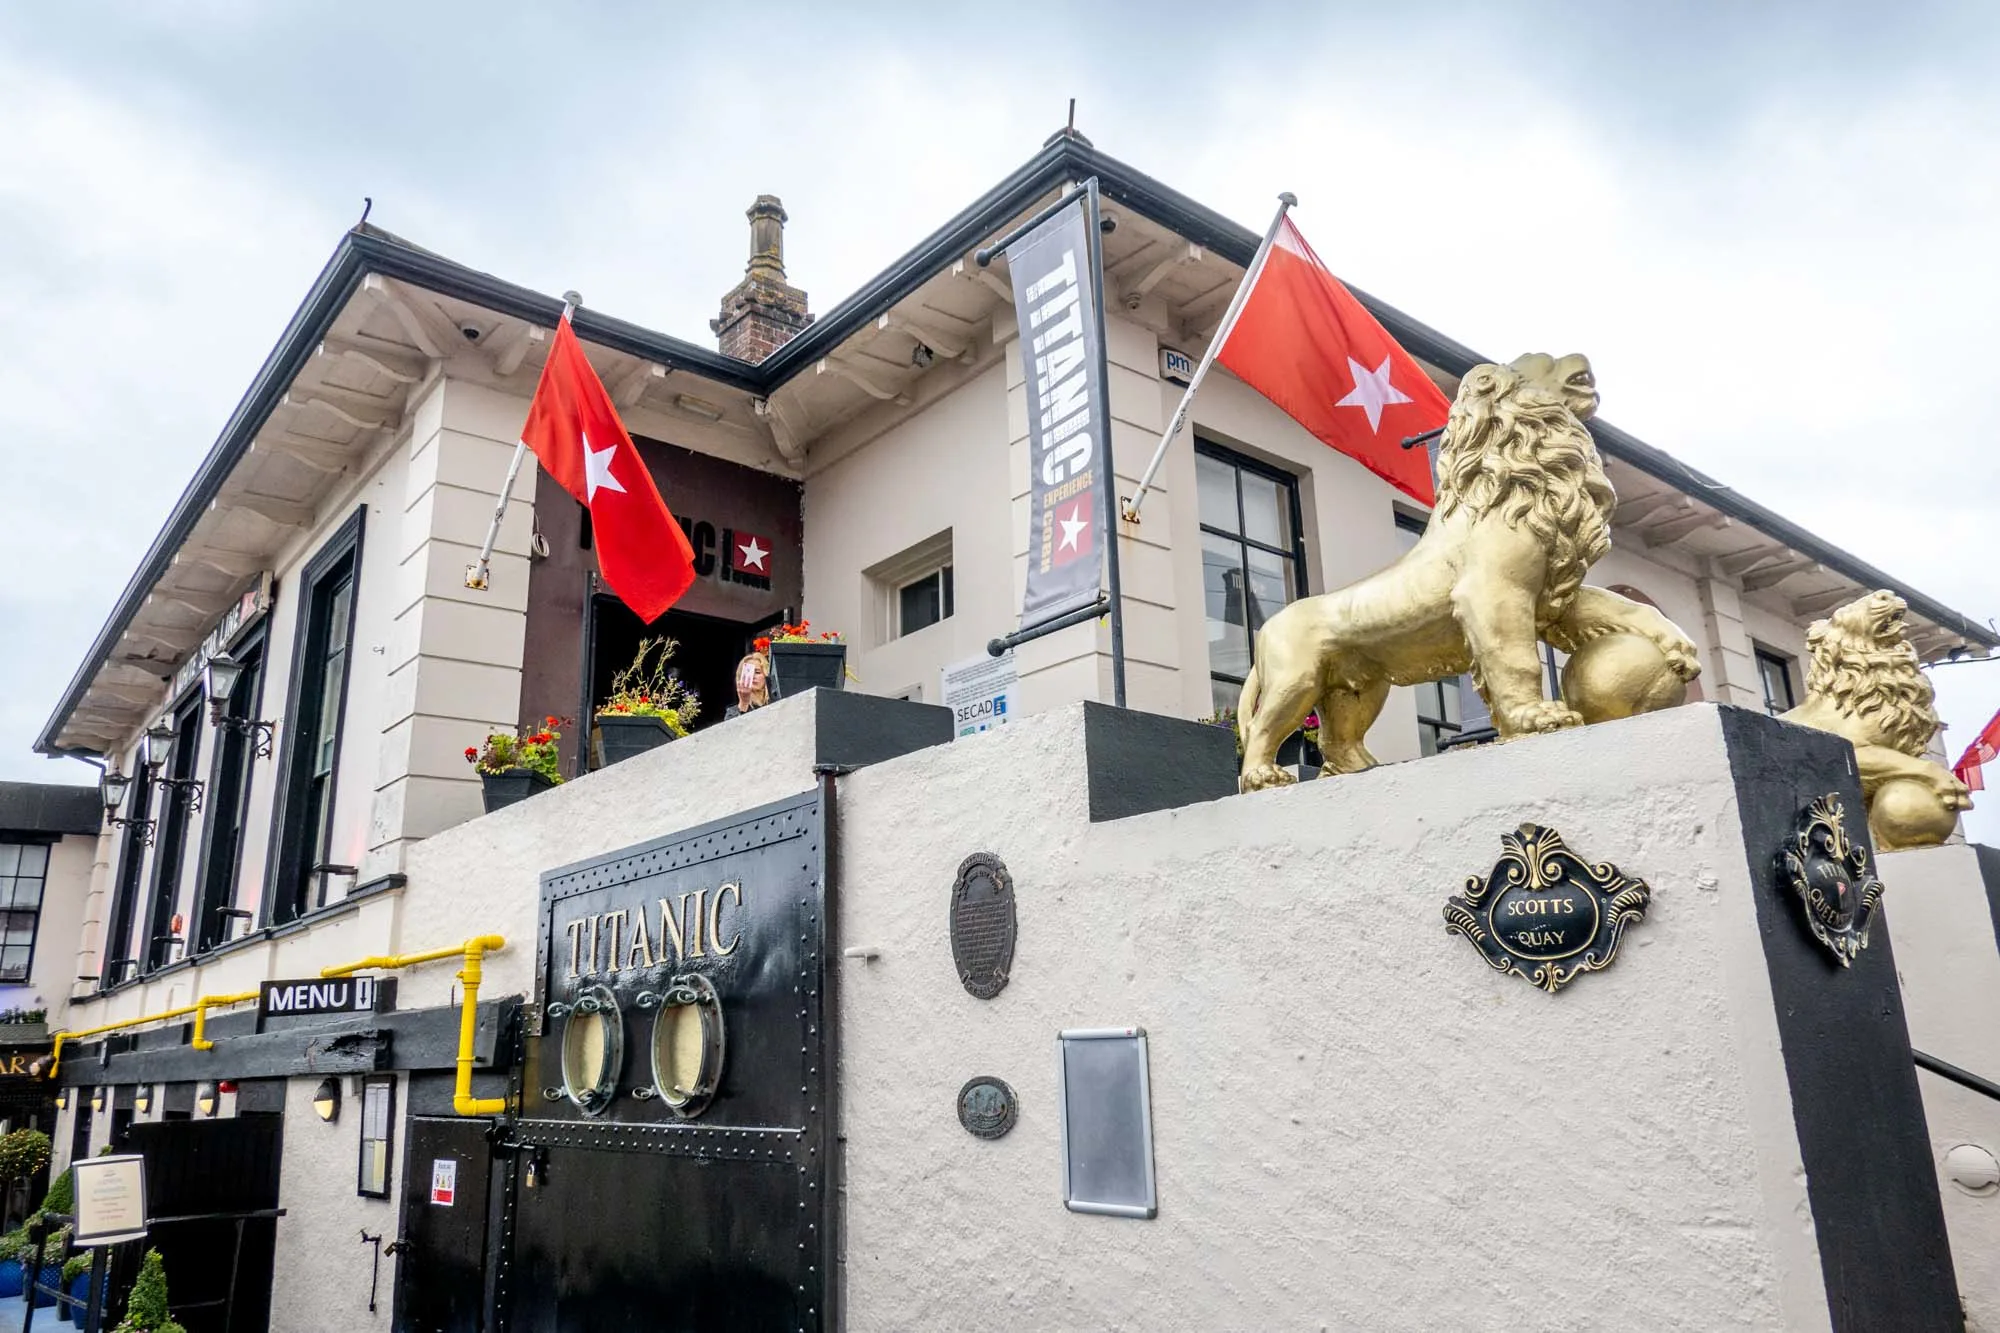 Gray concrete building with two golden lion statues and red flags with a white star by a sign for "Titanic Experience"